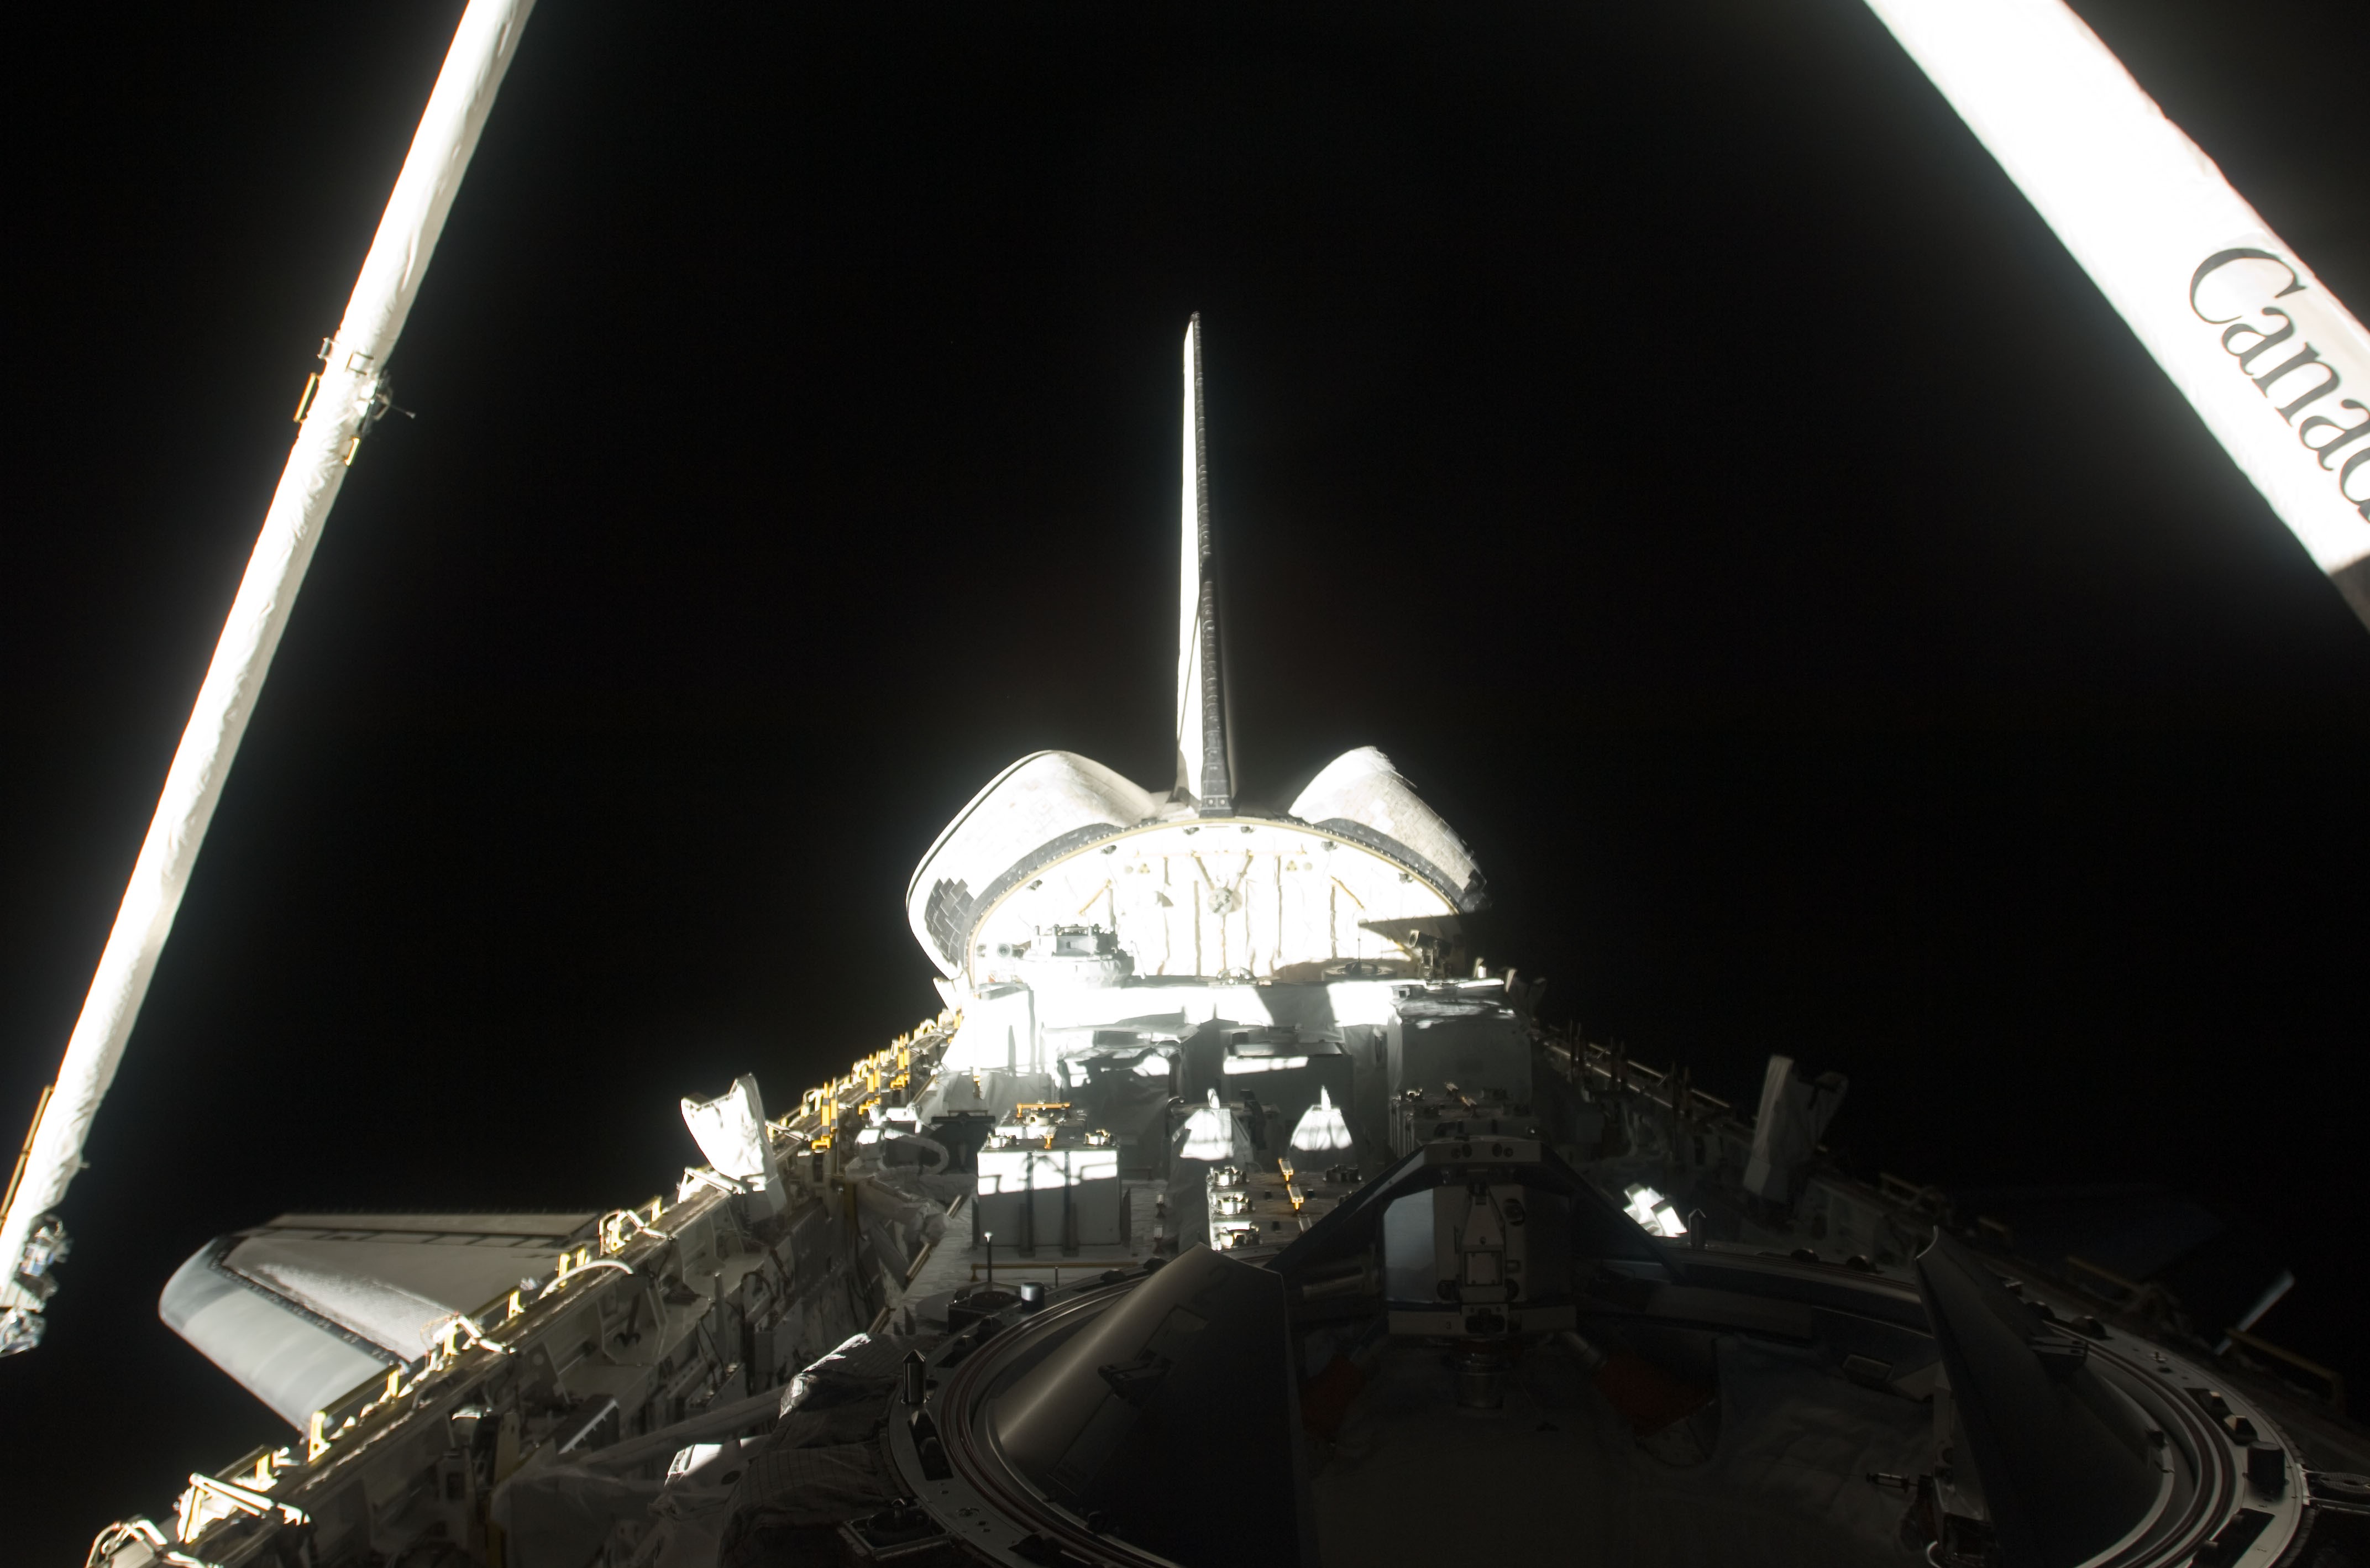 On the mission’s second day, the Shuttle Remote Manipulator System (SRMS) uses the Orbiter Boom Sensor System to image Endeavour’s Thermal Protection System (TPS)